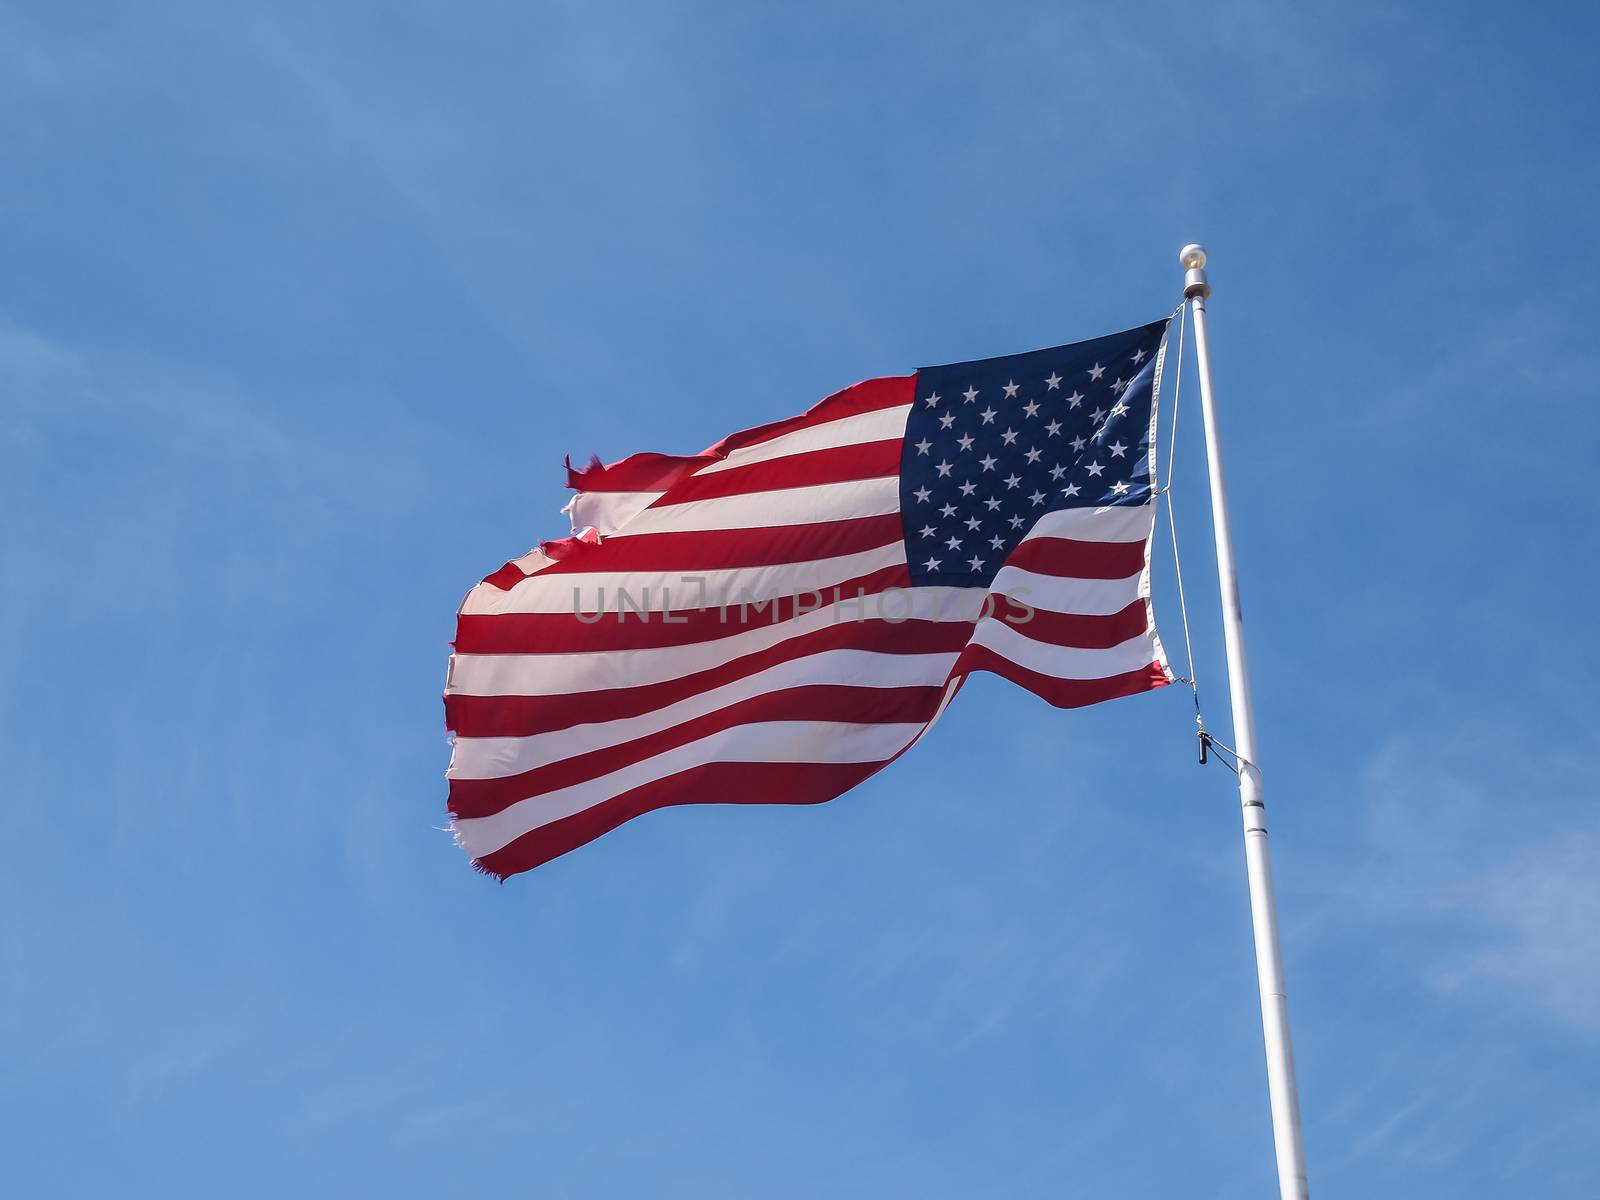 Tattered American Flag in the blue sky